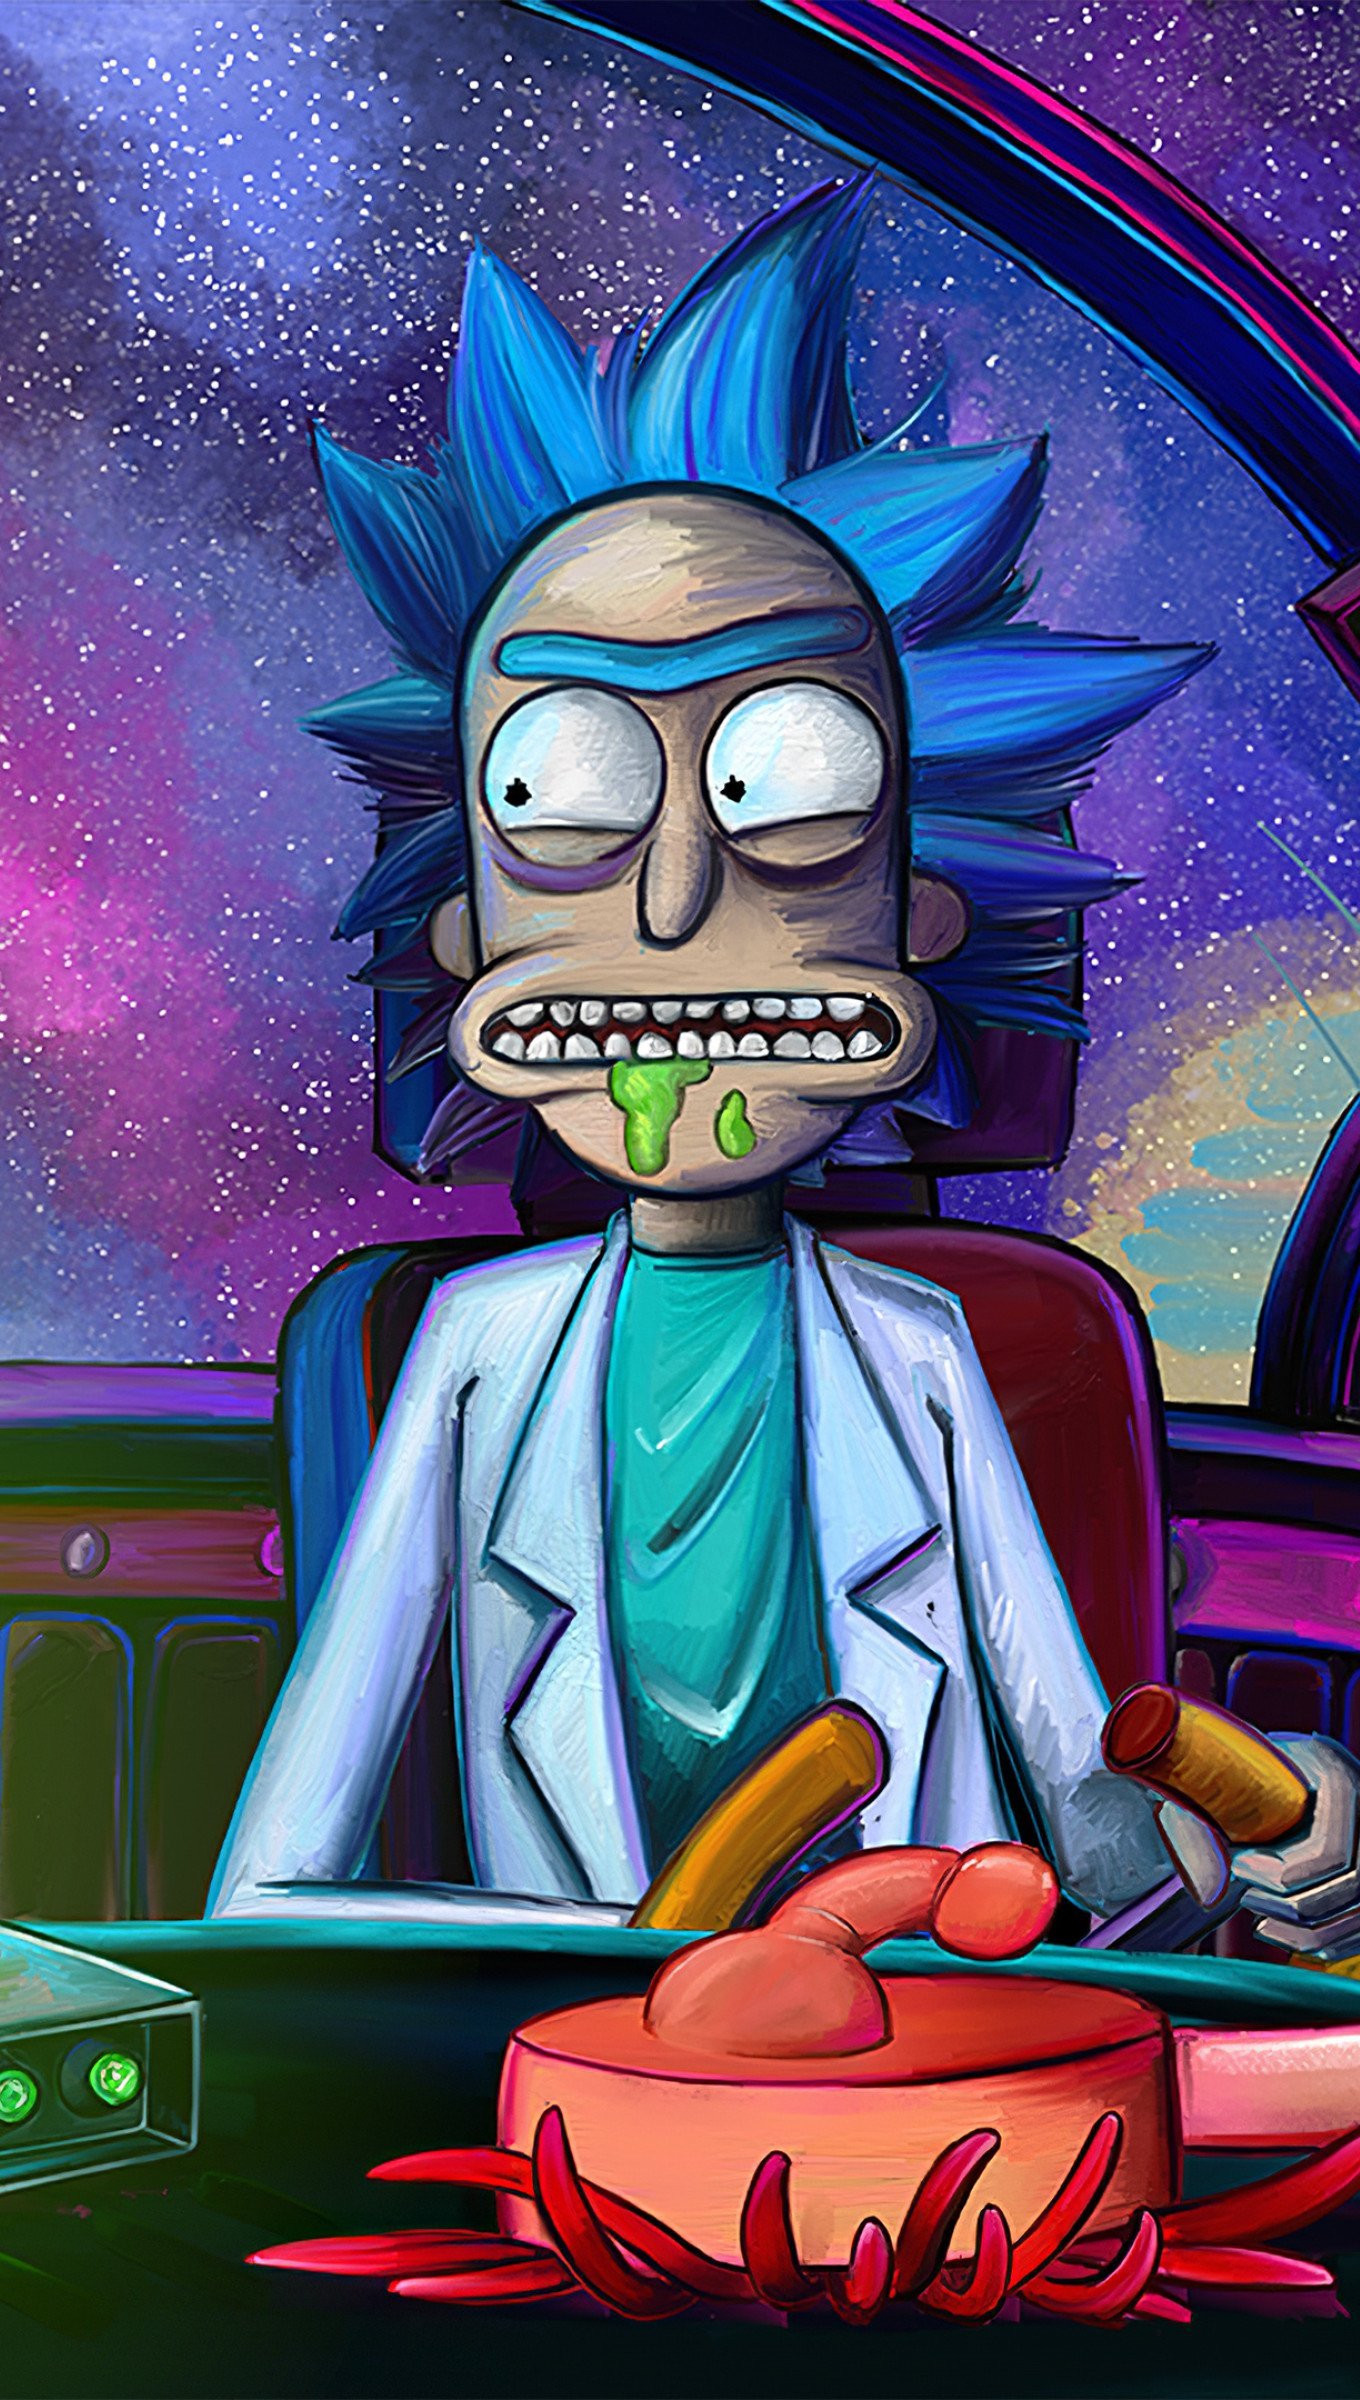 Top 112+ Rick and morty wallpaper - Snkrsvalue.com